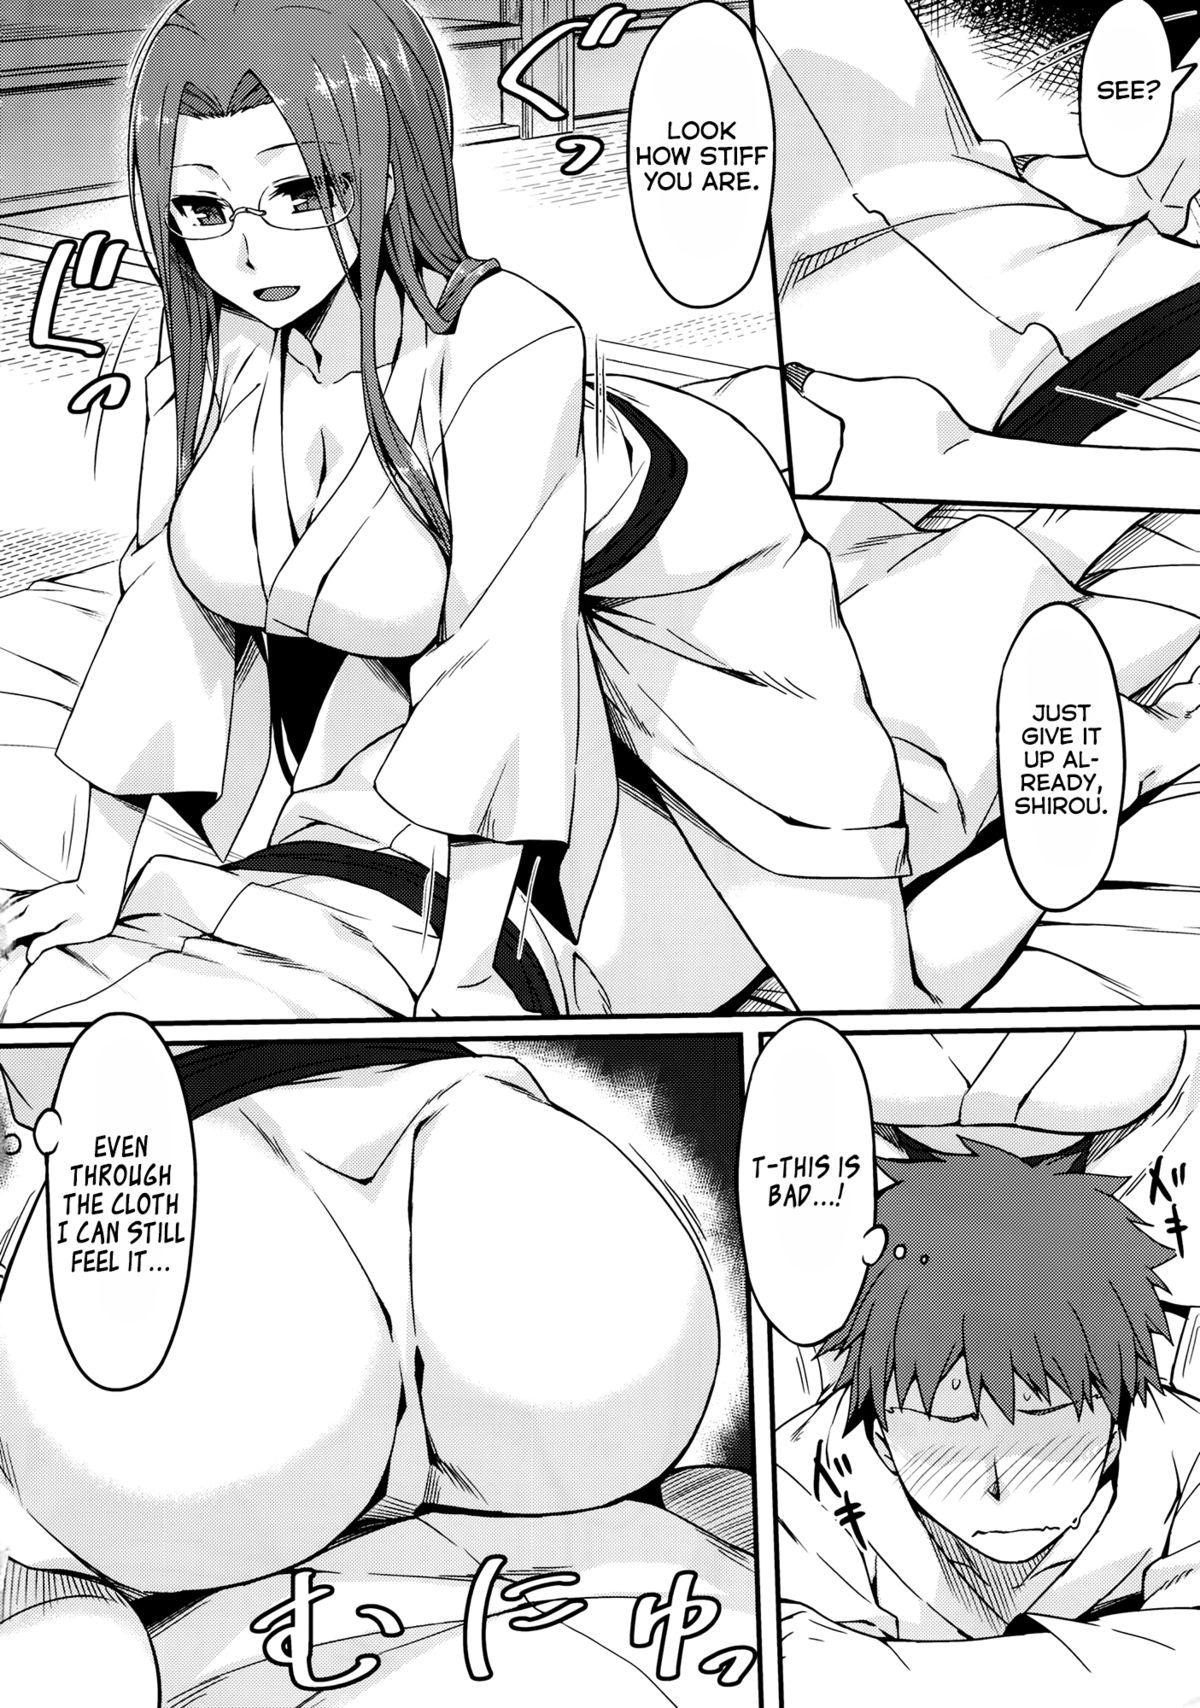 Usa (C88) [S.S.L (Yanagi)] Rider-san to Onsen Yado. Sonogo | Hot Spring Inn With Rider-san. After Story (Fate/stay night) [English] [Facedesk] - Fate stay night Mouth - Page 4